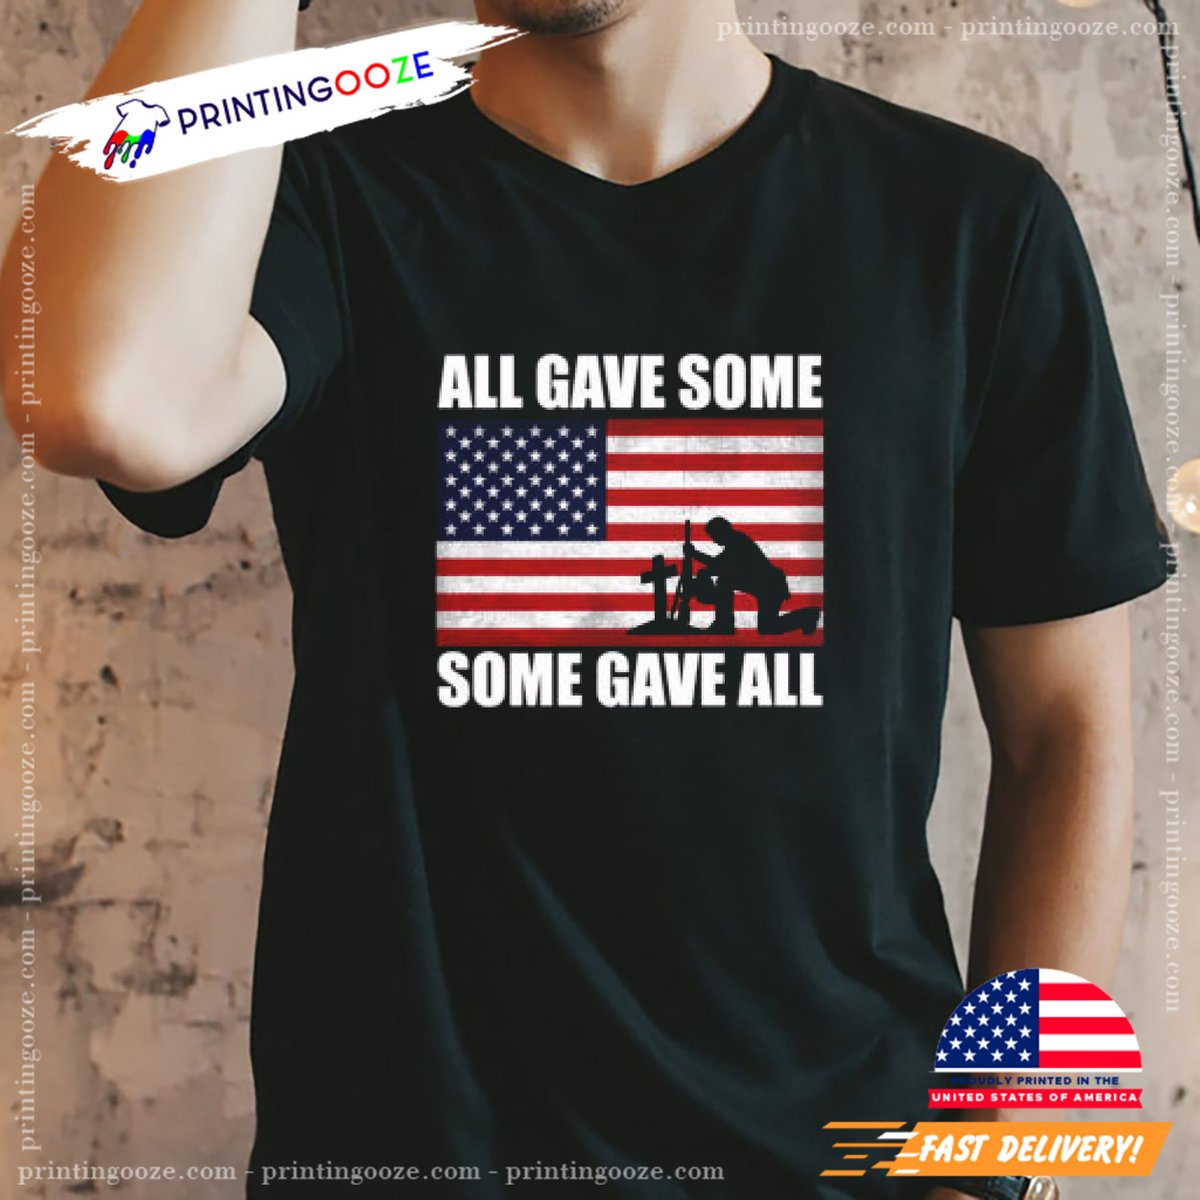 All Gave Some Some Gave All Memorial Day Tee

#PrintingOoze
#memorialday #memorialdayweekend #usa #love #america
👉Buy It Here: printingooze.com/product/all-ga…
👉Printing Ooze's Holidays Shirts: printingooze.com/shop-by/holida…